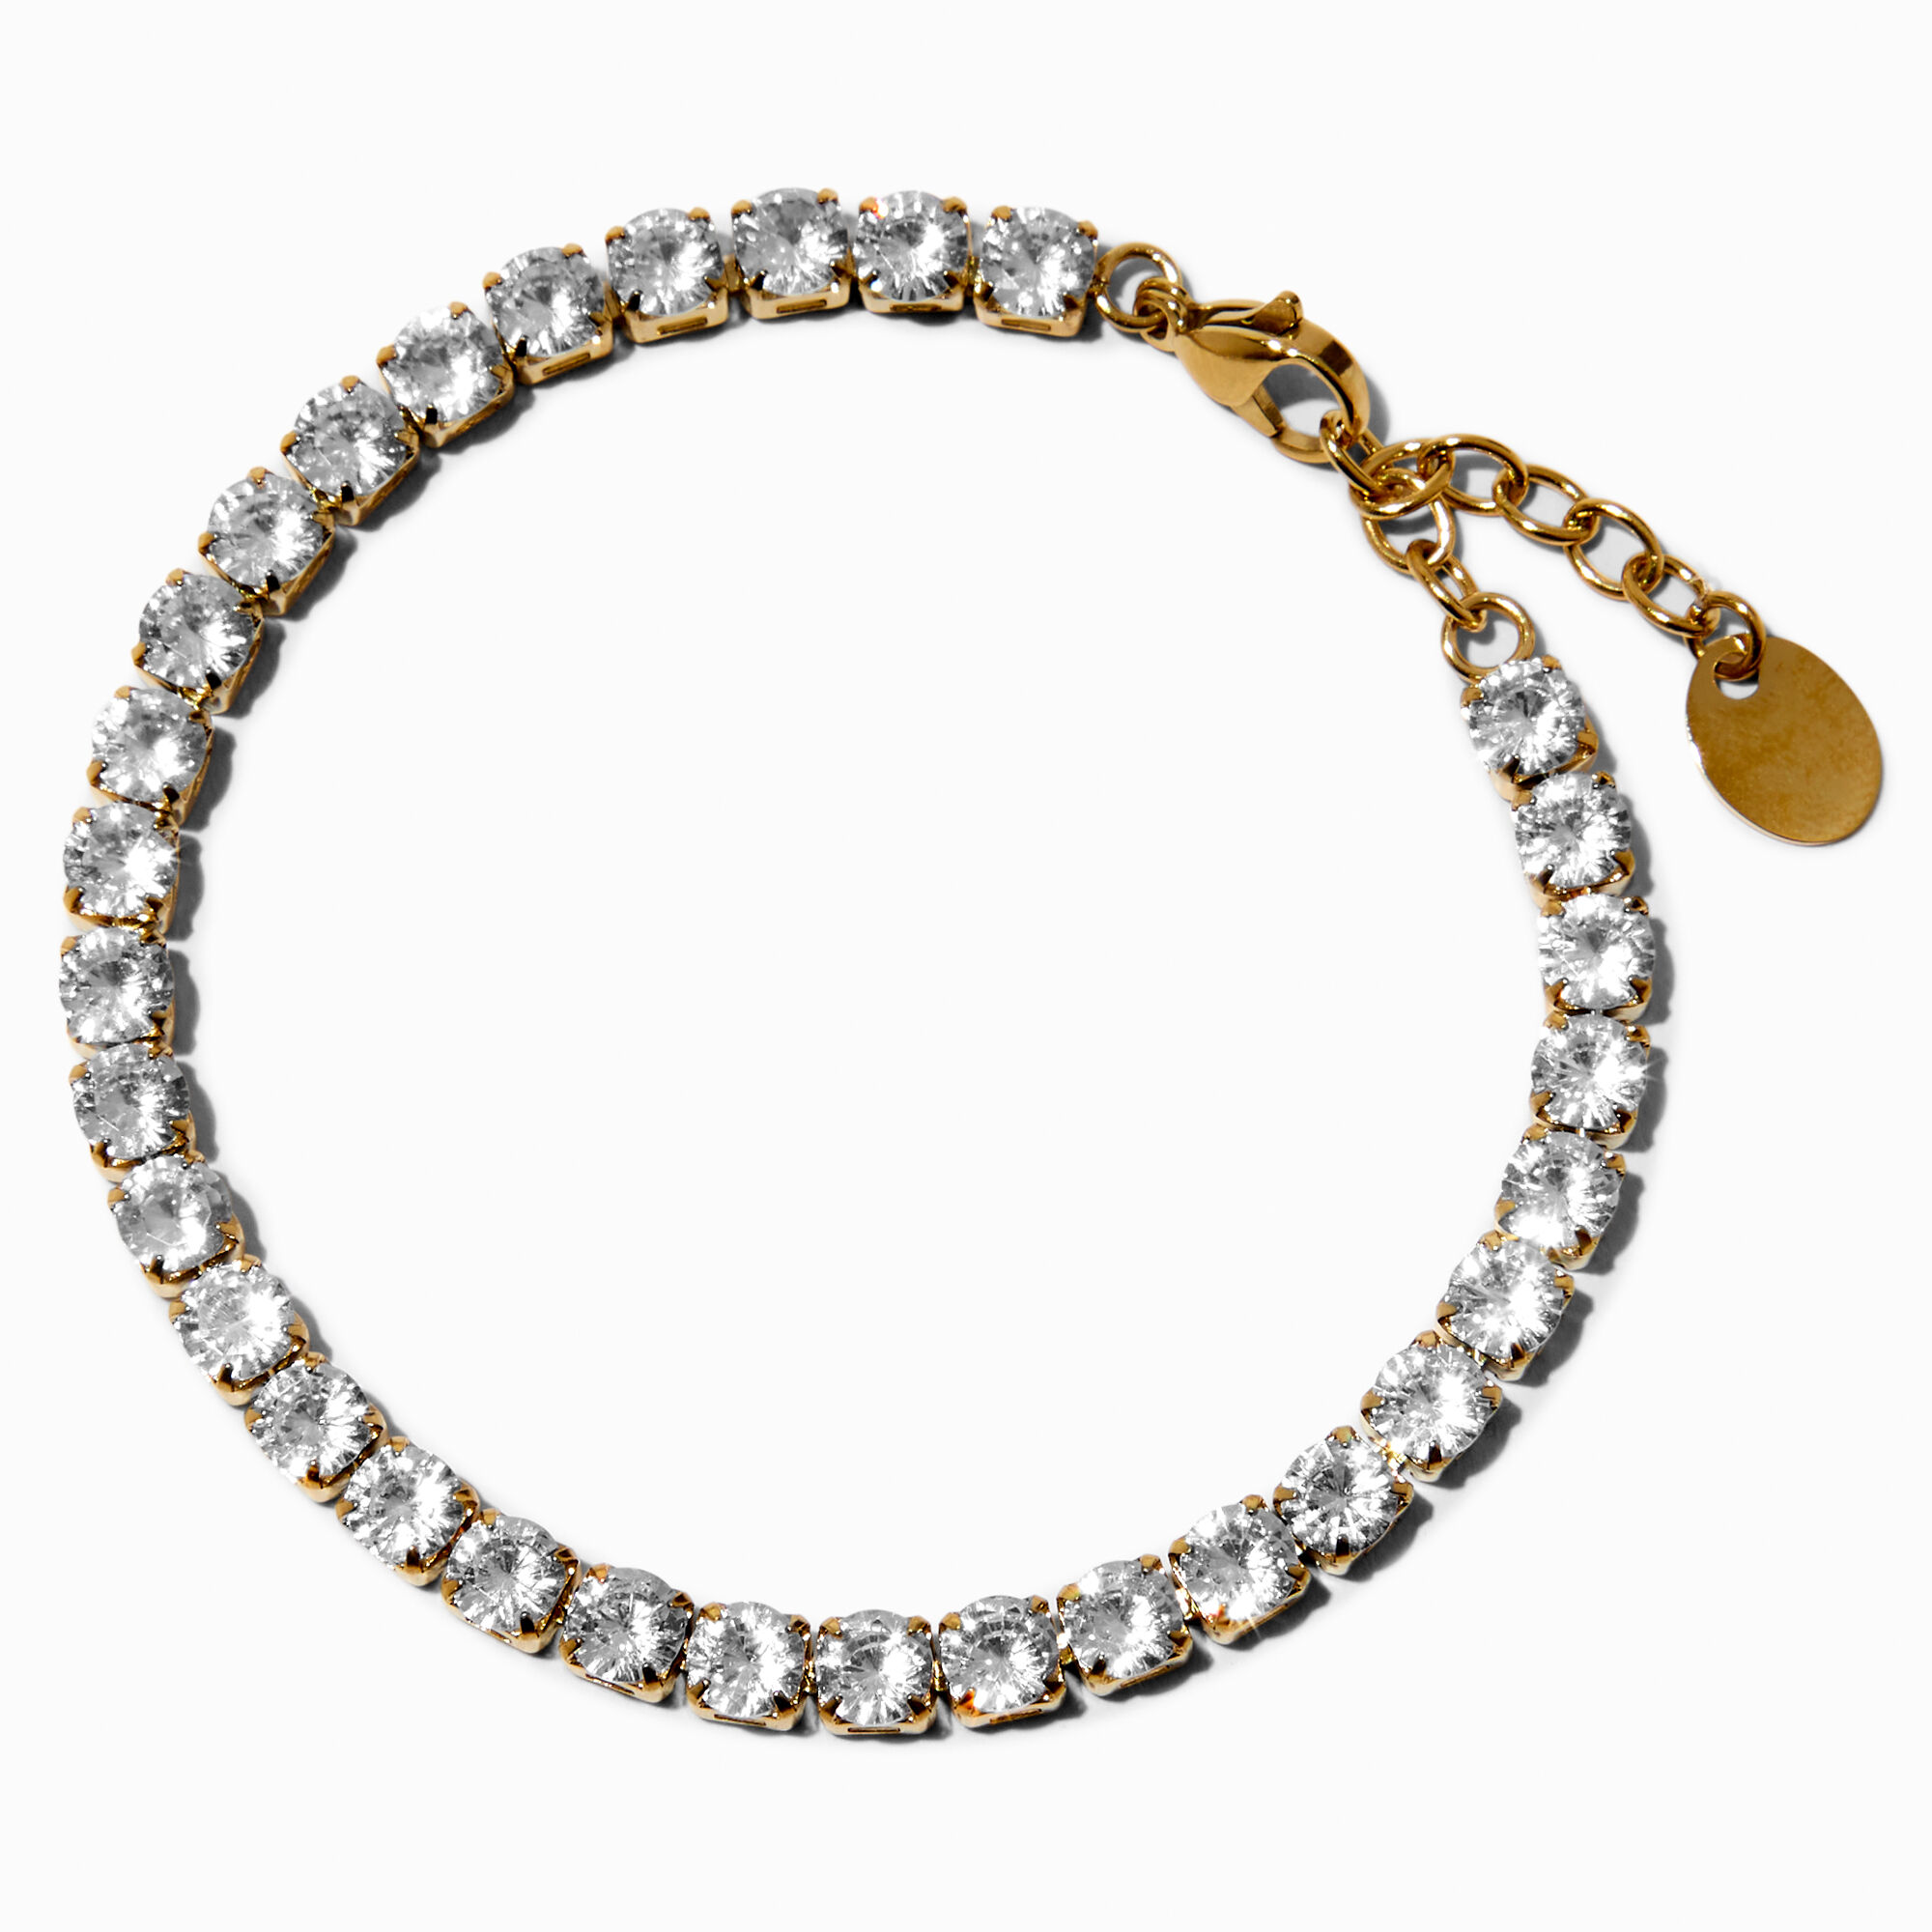 View Claires Tone Stainless Steel Cubic Zirconia Tennis Bracelet Gold information